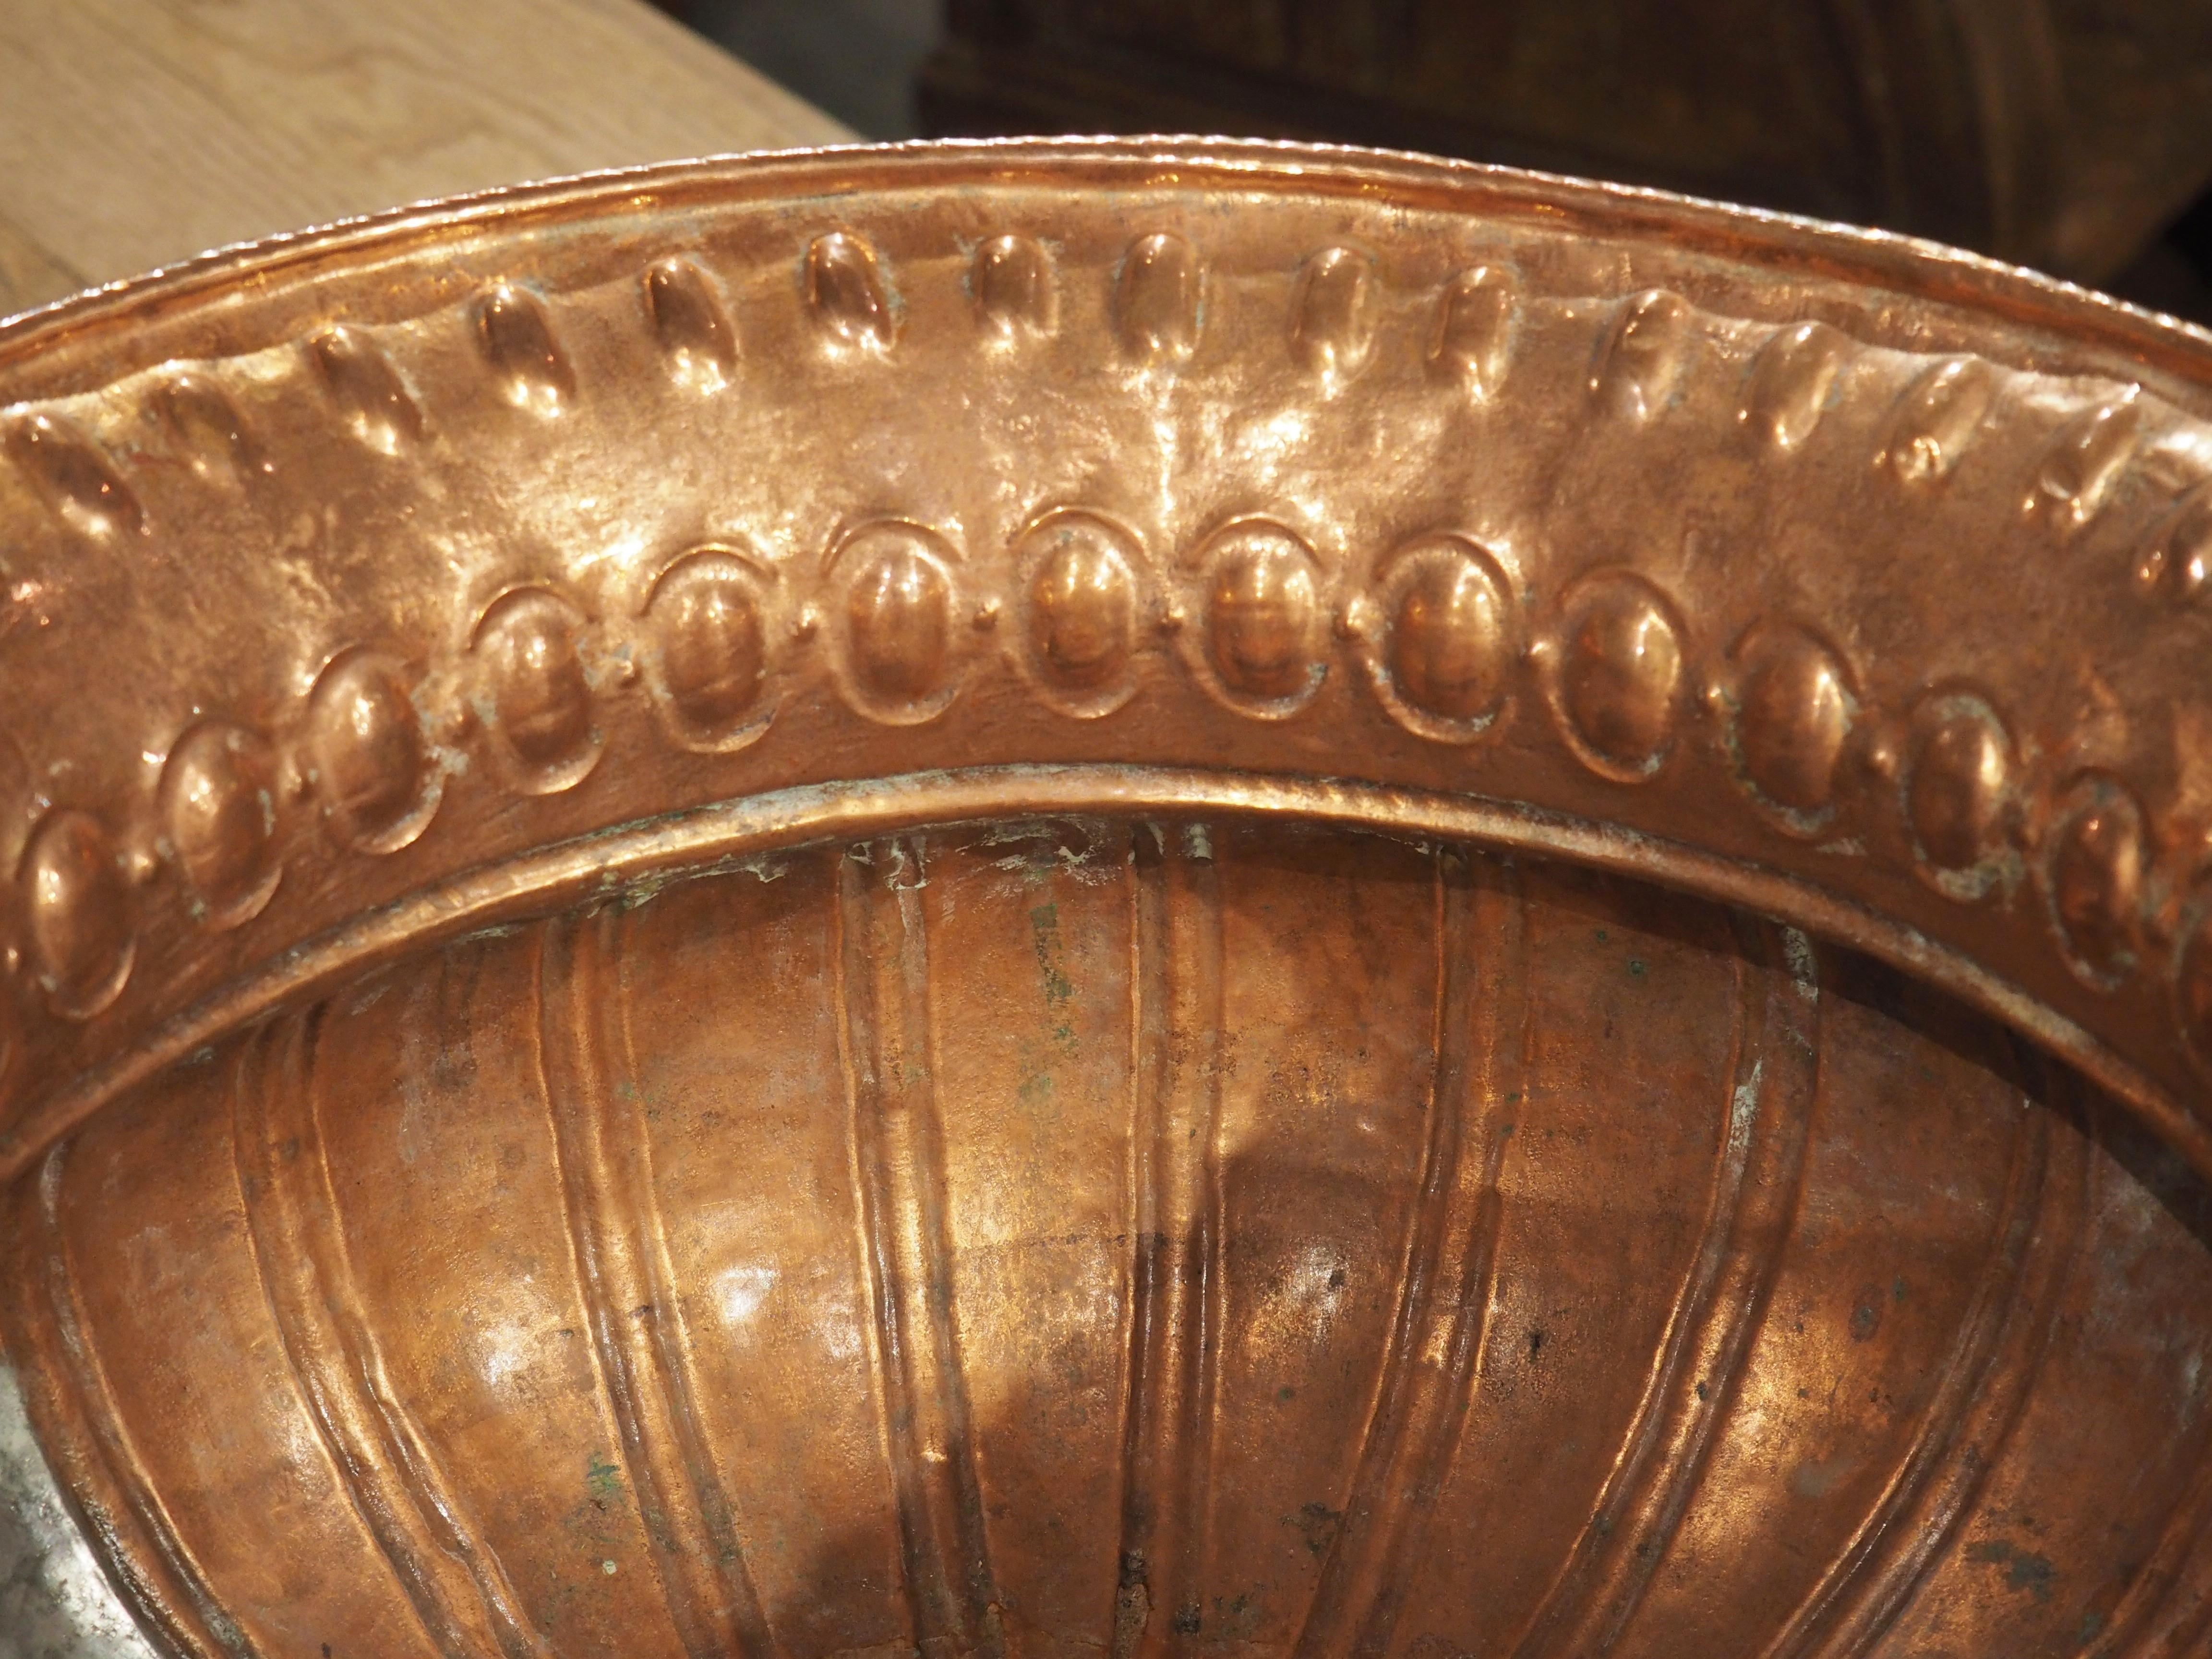 Known as a rafraichissoir, this beautifully polished copper vessel has been hammered using both repousse and chasing metalworking techniques. Beneath the thinly rolled rim is a repetitive border of widely space recessed lobes on the neck, just above